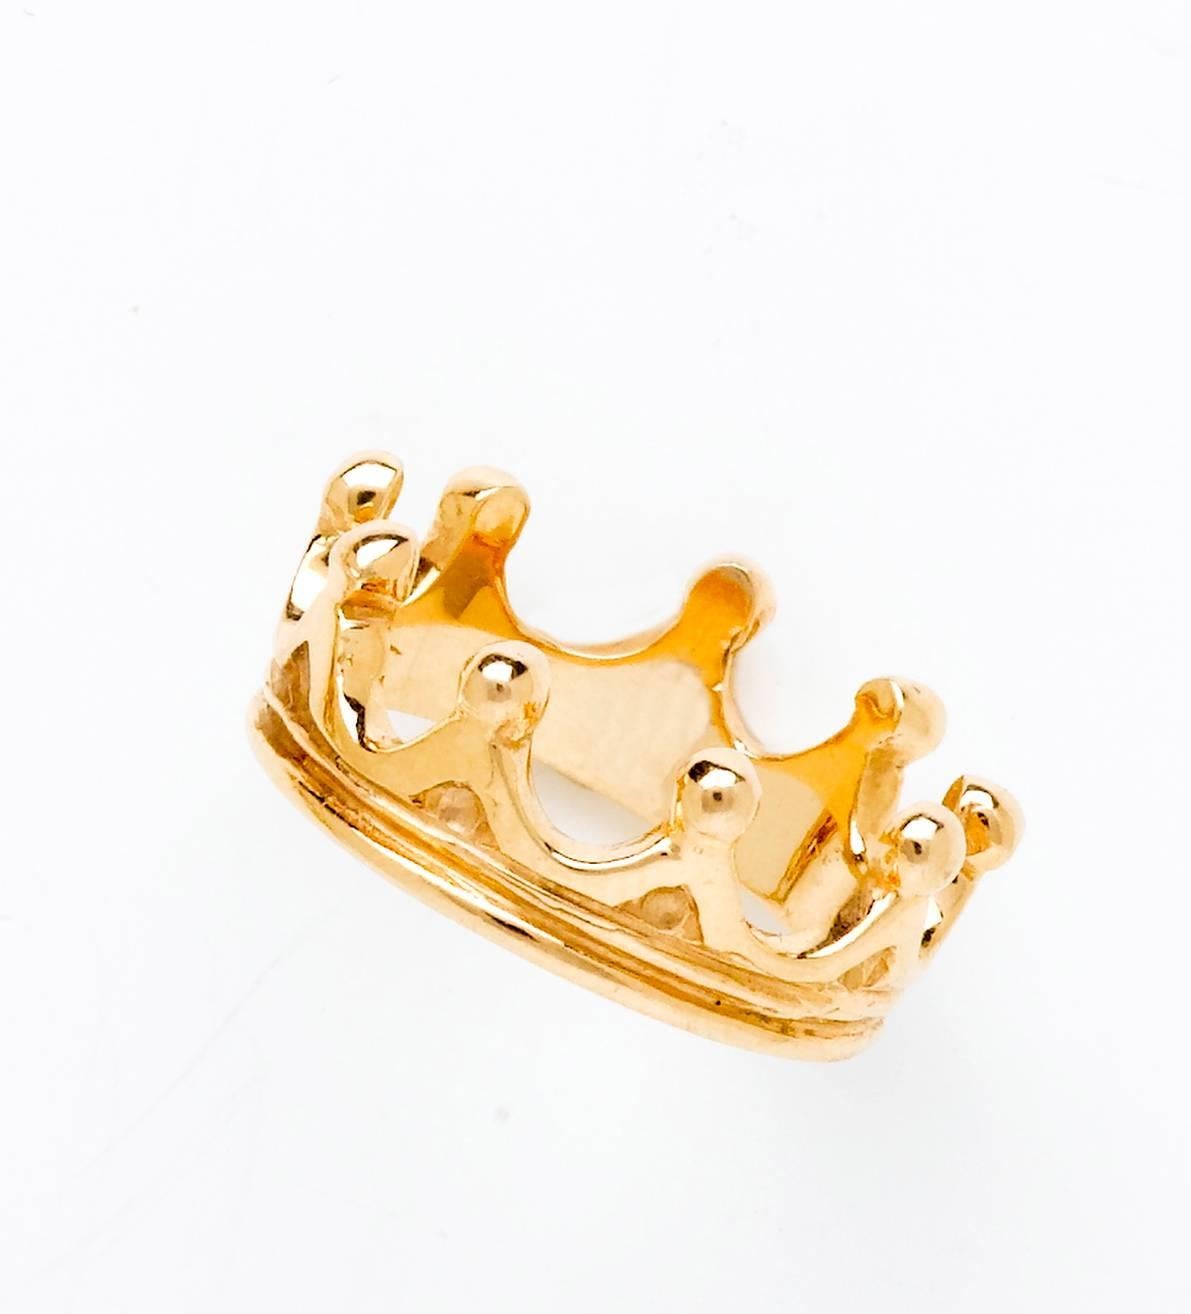 Medieval hand crafted  Queen's ring 14K yellow gold